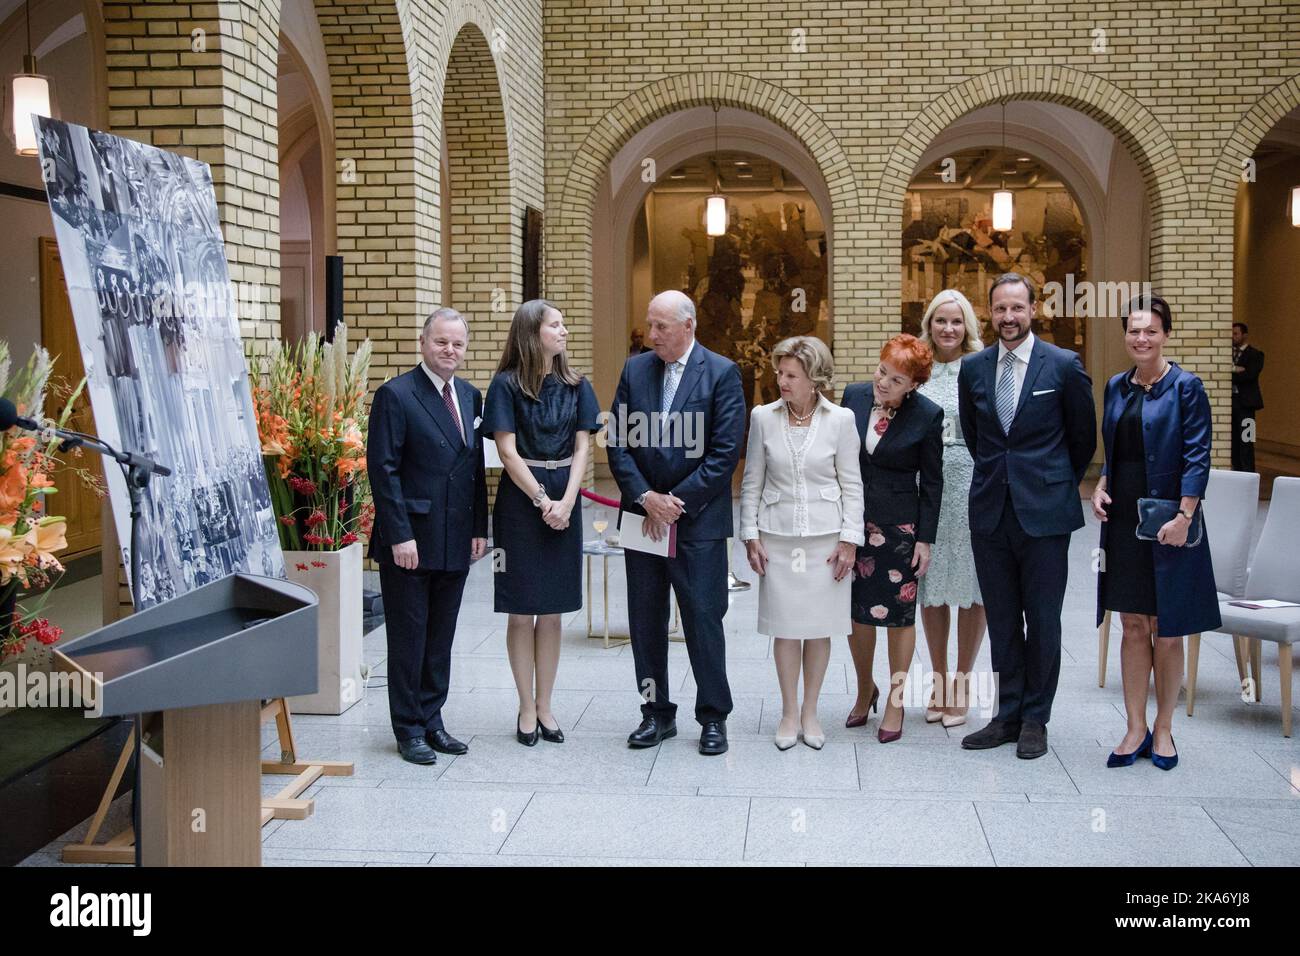 Oslo, Norway 20170918. From left: President of the Storting Olemic Thommessen, painter Kira Wager, King Harald, Queen Sonja, Marit Nybakk, Crown Princess Mette-Marit, Crown Prince Haakon and Jury Chairman during the unveiling of King and Queen's 80th anniversary gift from the Storting (Parliament) on Monday. The gift is a painting by Kira Wager called 'King Olav V's Oath for the Storting'. Photo: Audun Braastad / NTB scanpi Stock Photo